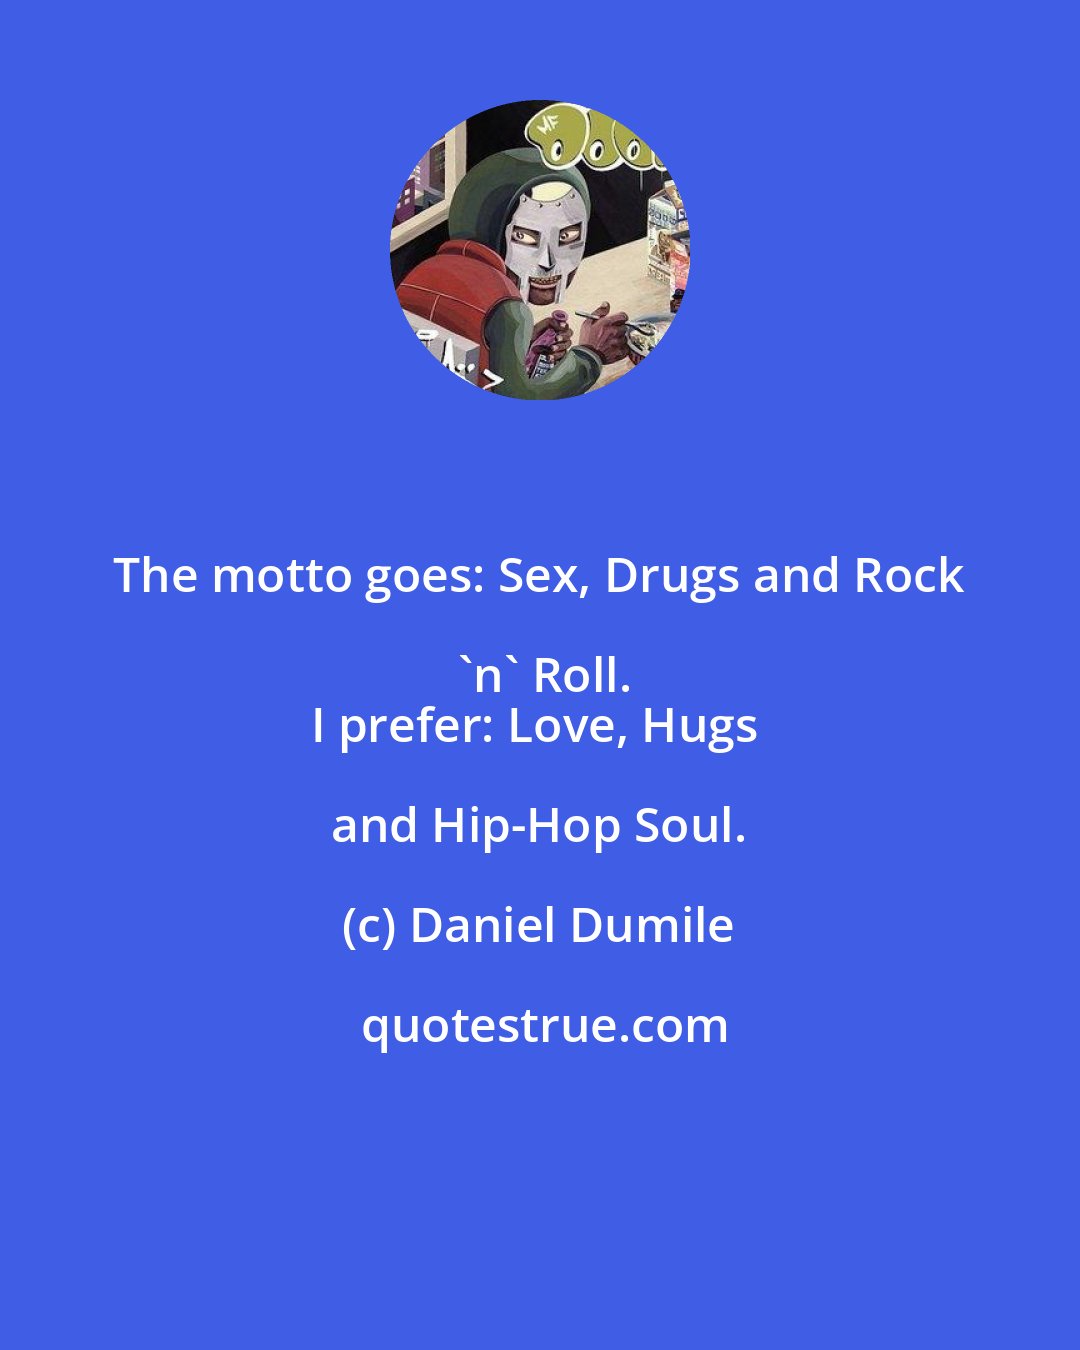 Daniel Dumile: The motto goes: Sex, Drugs and Rock 'n' Roll.
I prefer: Love, Hugs and Hip-Hop Soul.